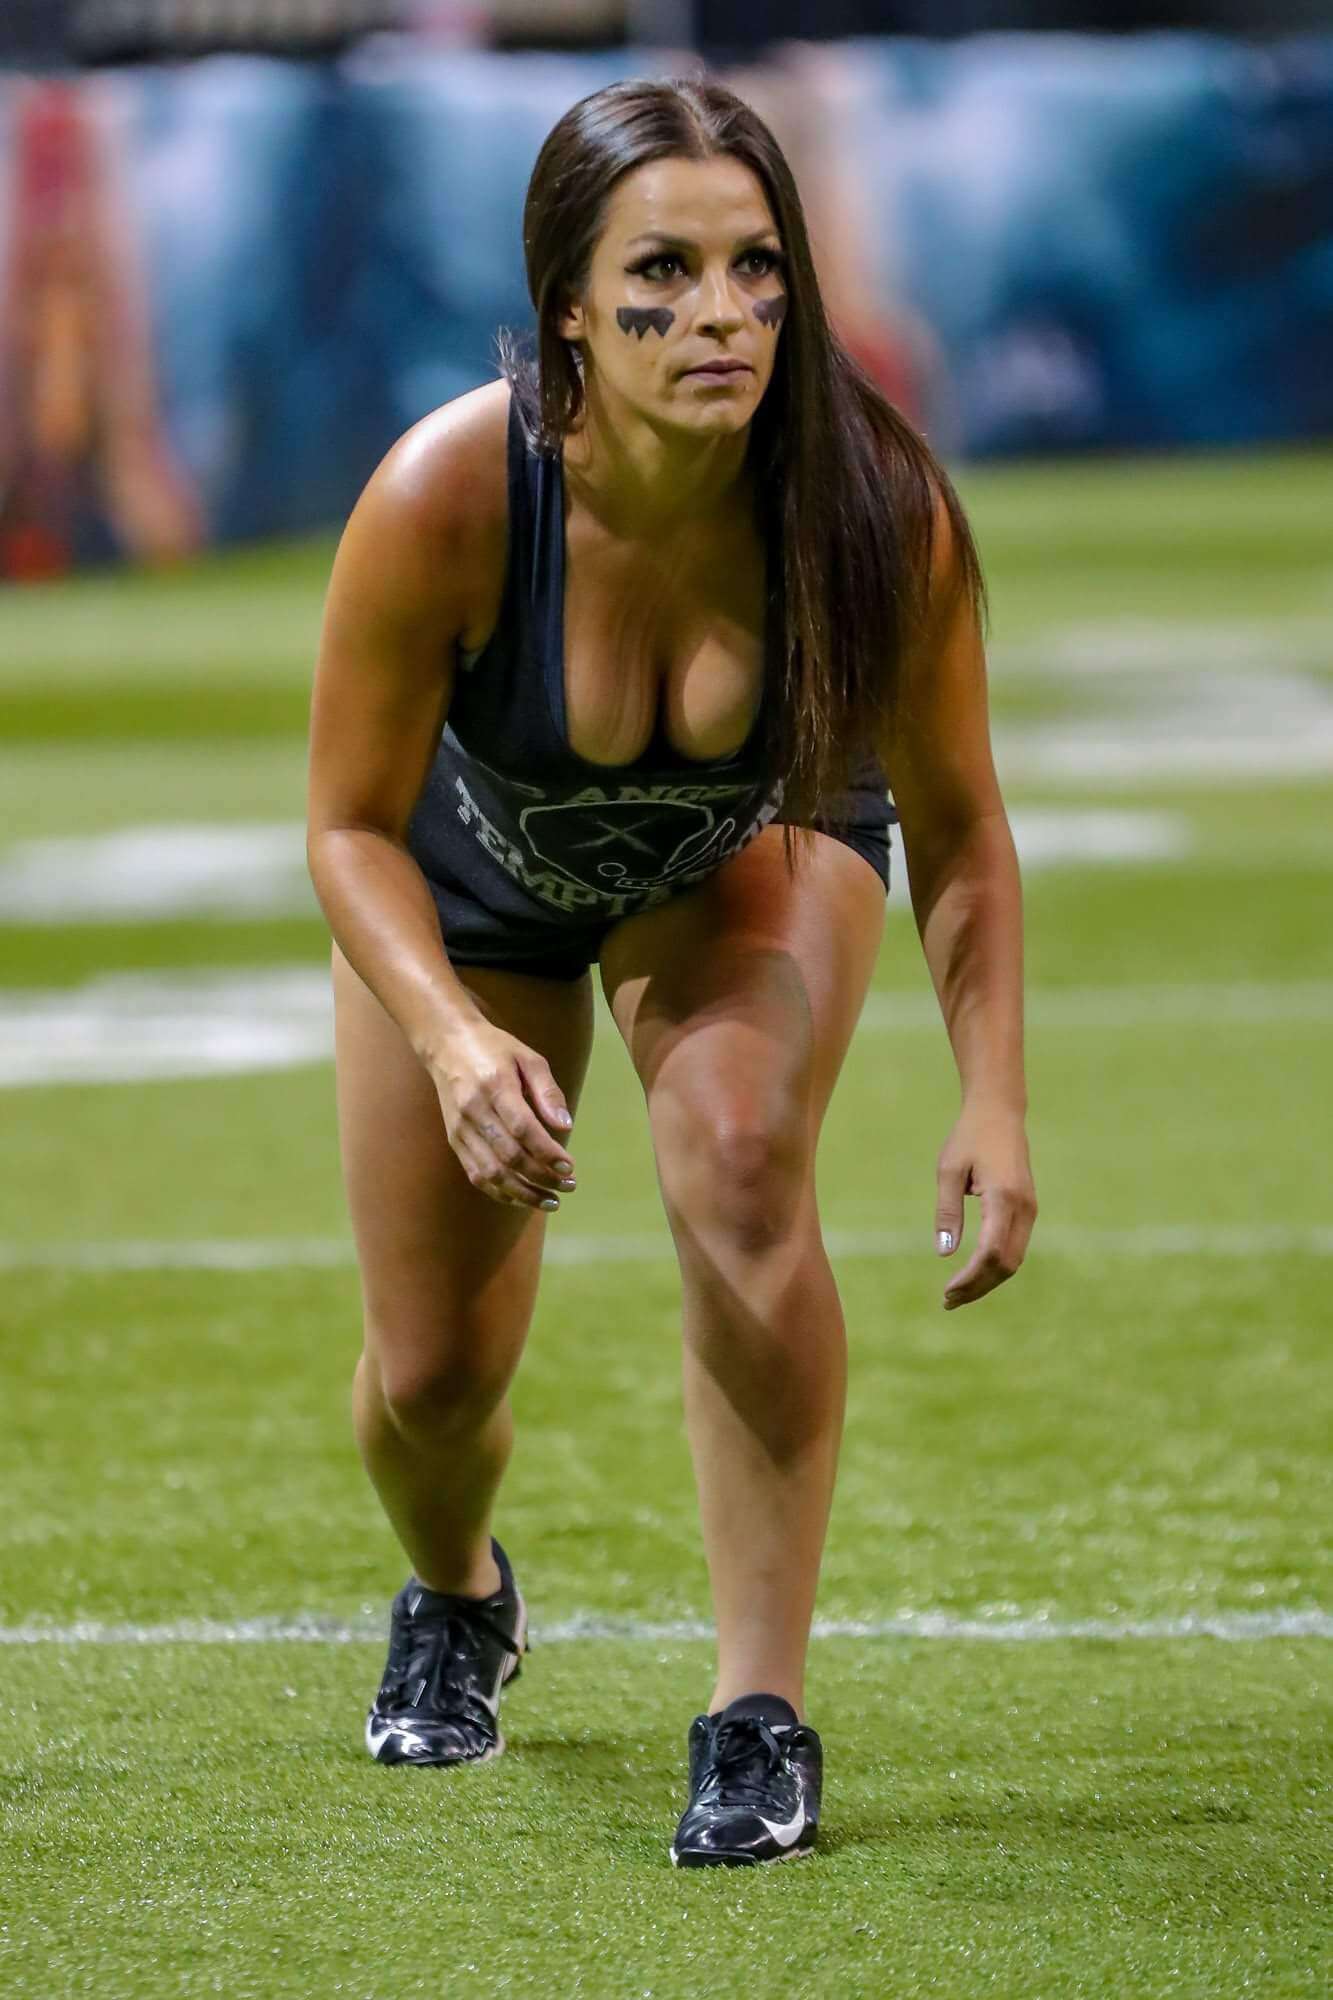 The Legends Football League Beautiful Women And Football, Need We Say Anymore! 10